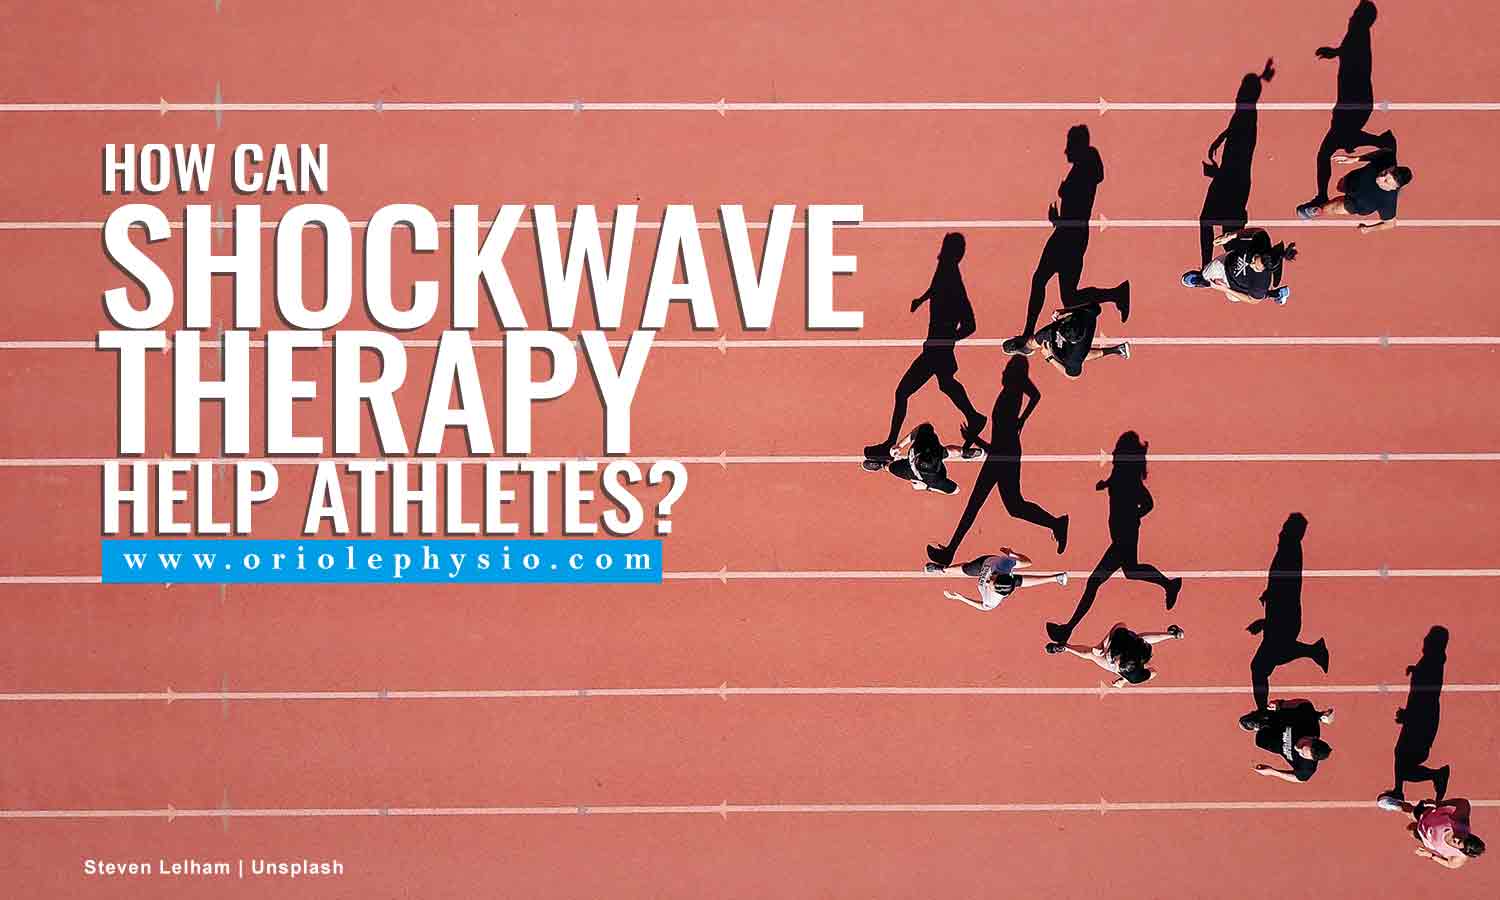 How Can Shockwave Therapy Help Athletes?